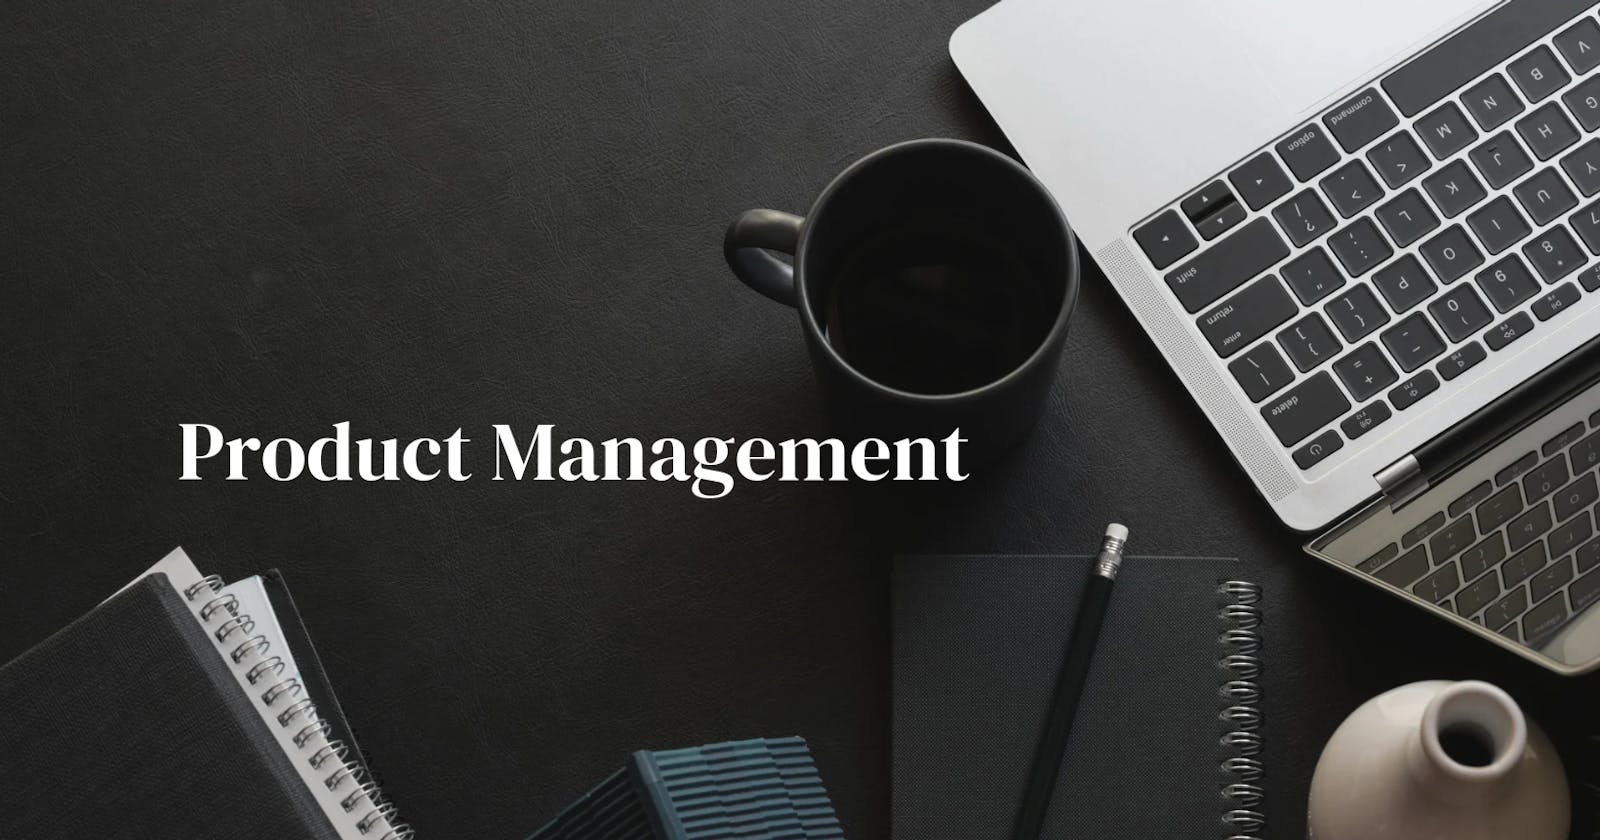 Product Management; What Does It Entail